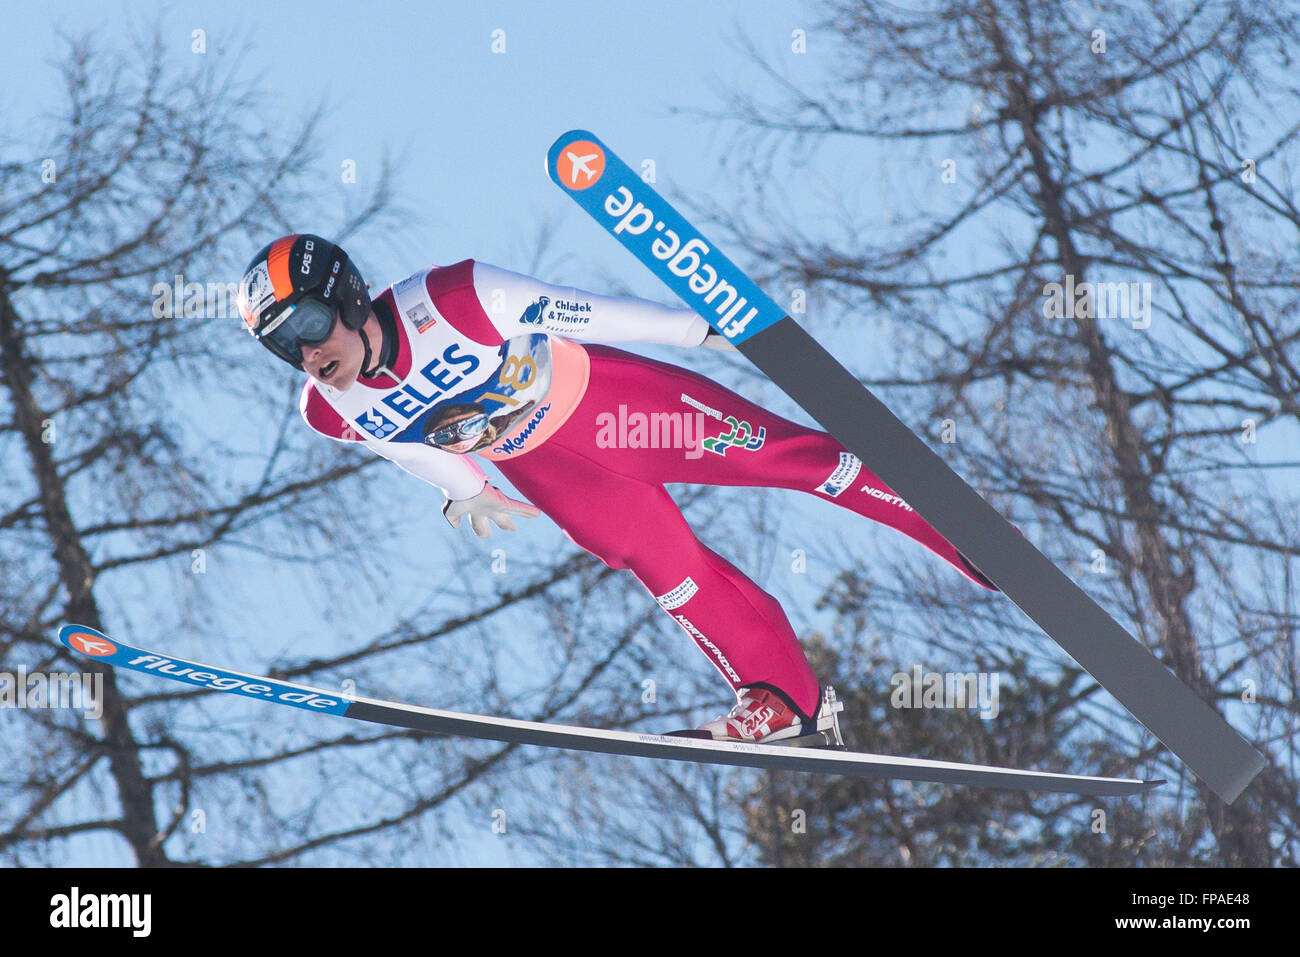 Planica, Slovenia. 18th Mar, 2016. Jan Matura of Czech Republic competes during Planica FIS Ski Jumping World Cup finals on the March 18, 2016 in Planica, Slovenia. © Rok Rakun/Pacific Press/Alamy Live News Stock Photo